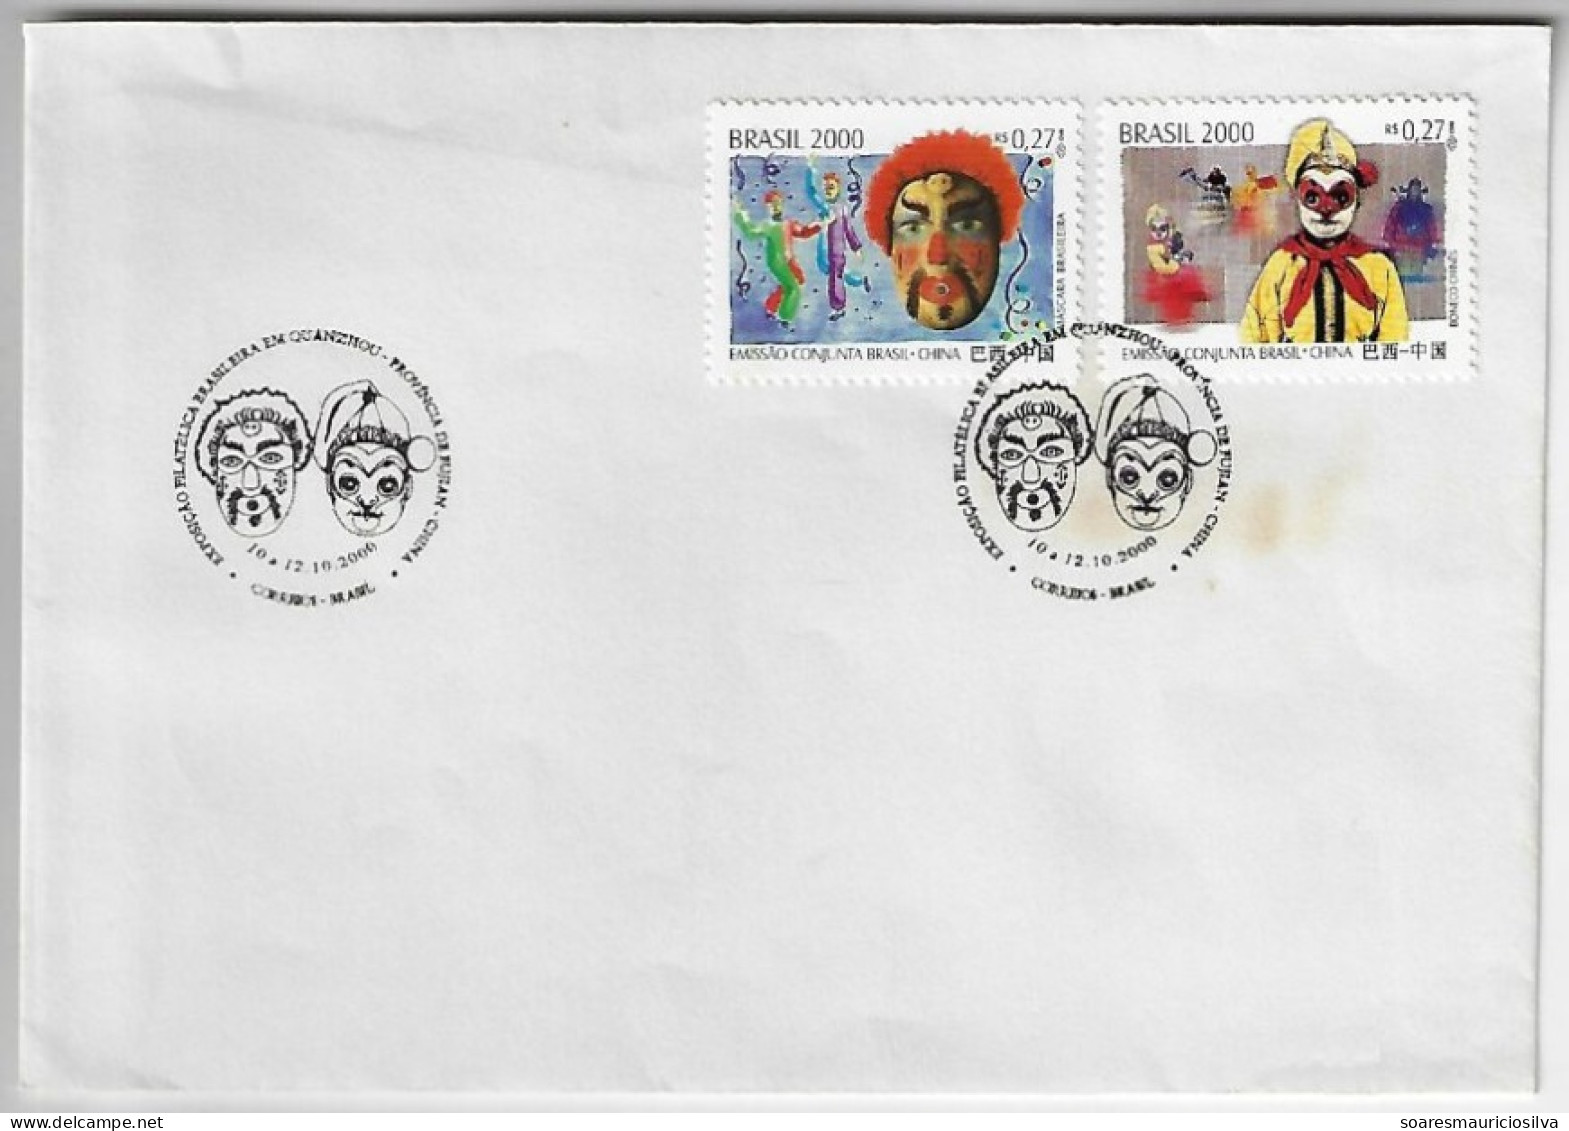 2000 2 Cover Stamp Joint Issue Brazil China 25 Years Diplomatic Relations Between Countries Brazilian Mask Chinese Doll - Cartas & Documentos